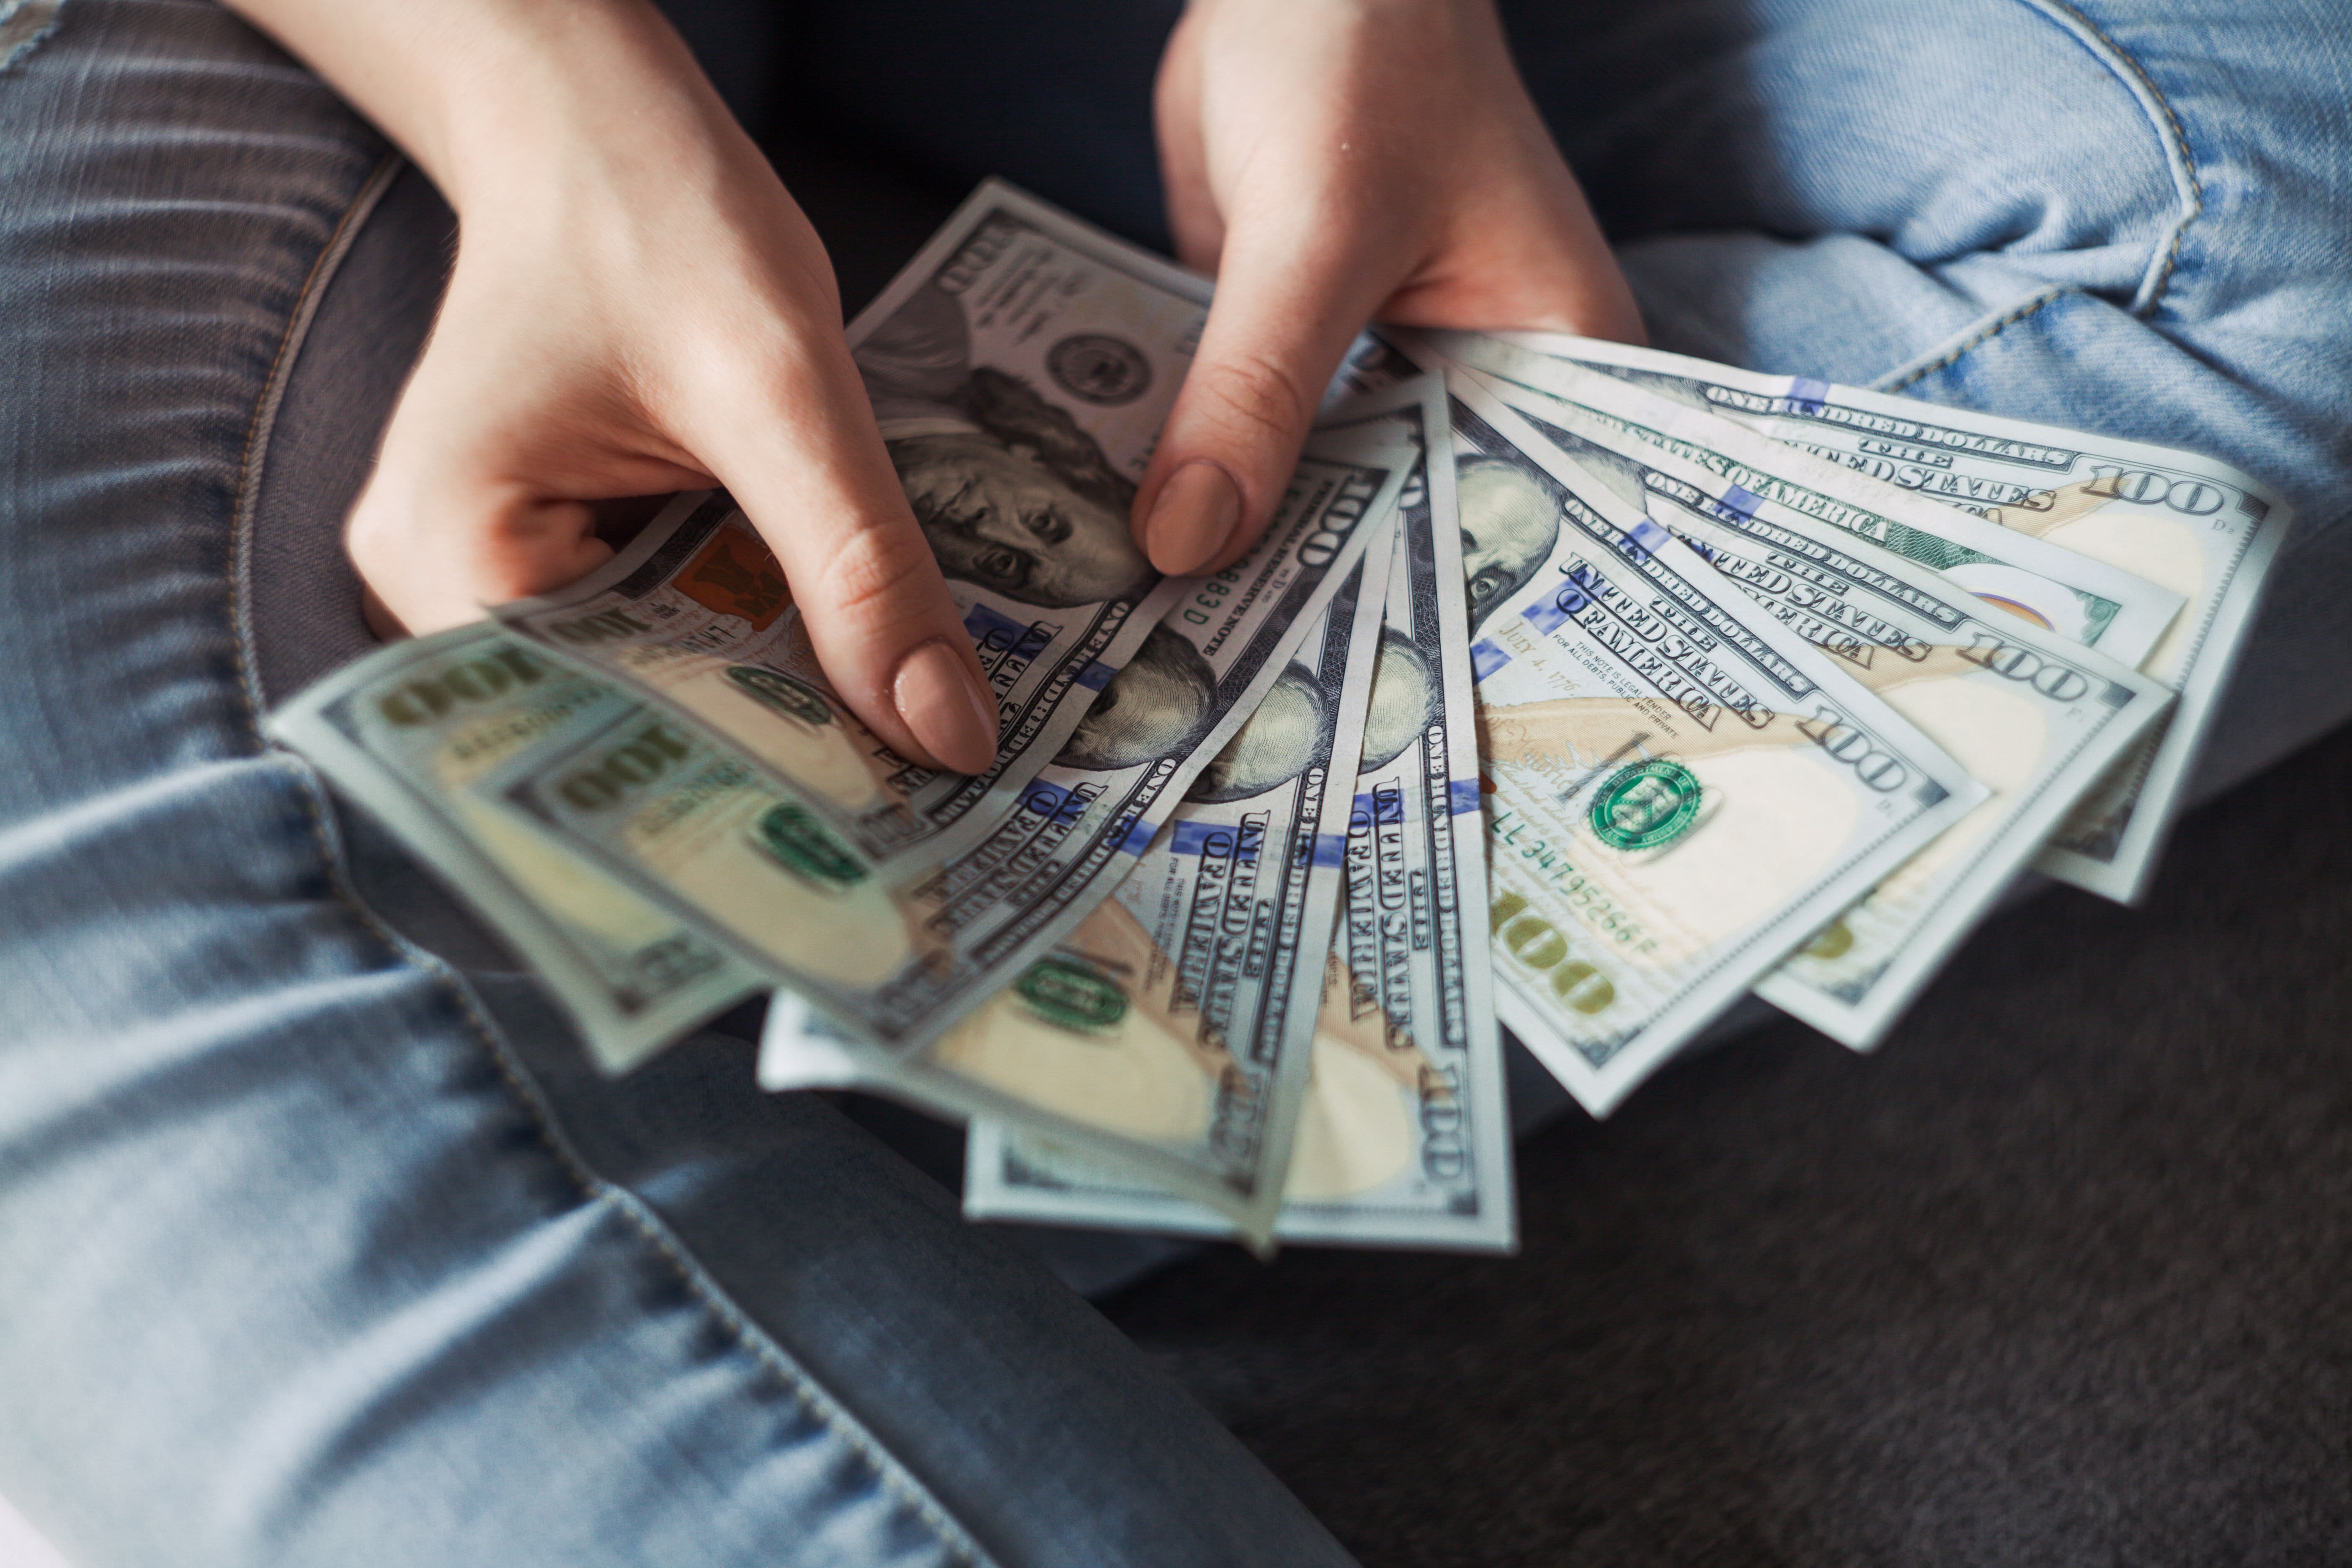 Photo by Alexander Mils: https://www.pexels.com/photo/person-holding-100-us-dollar-banknotes-2068975/